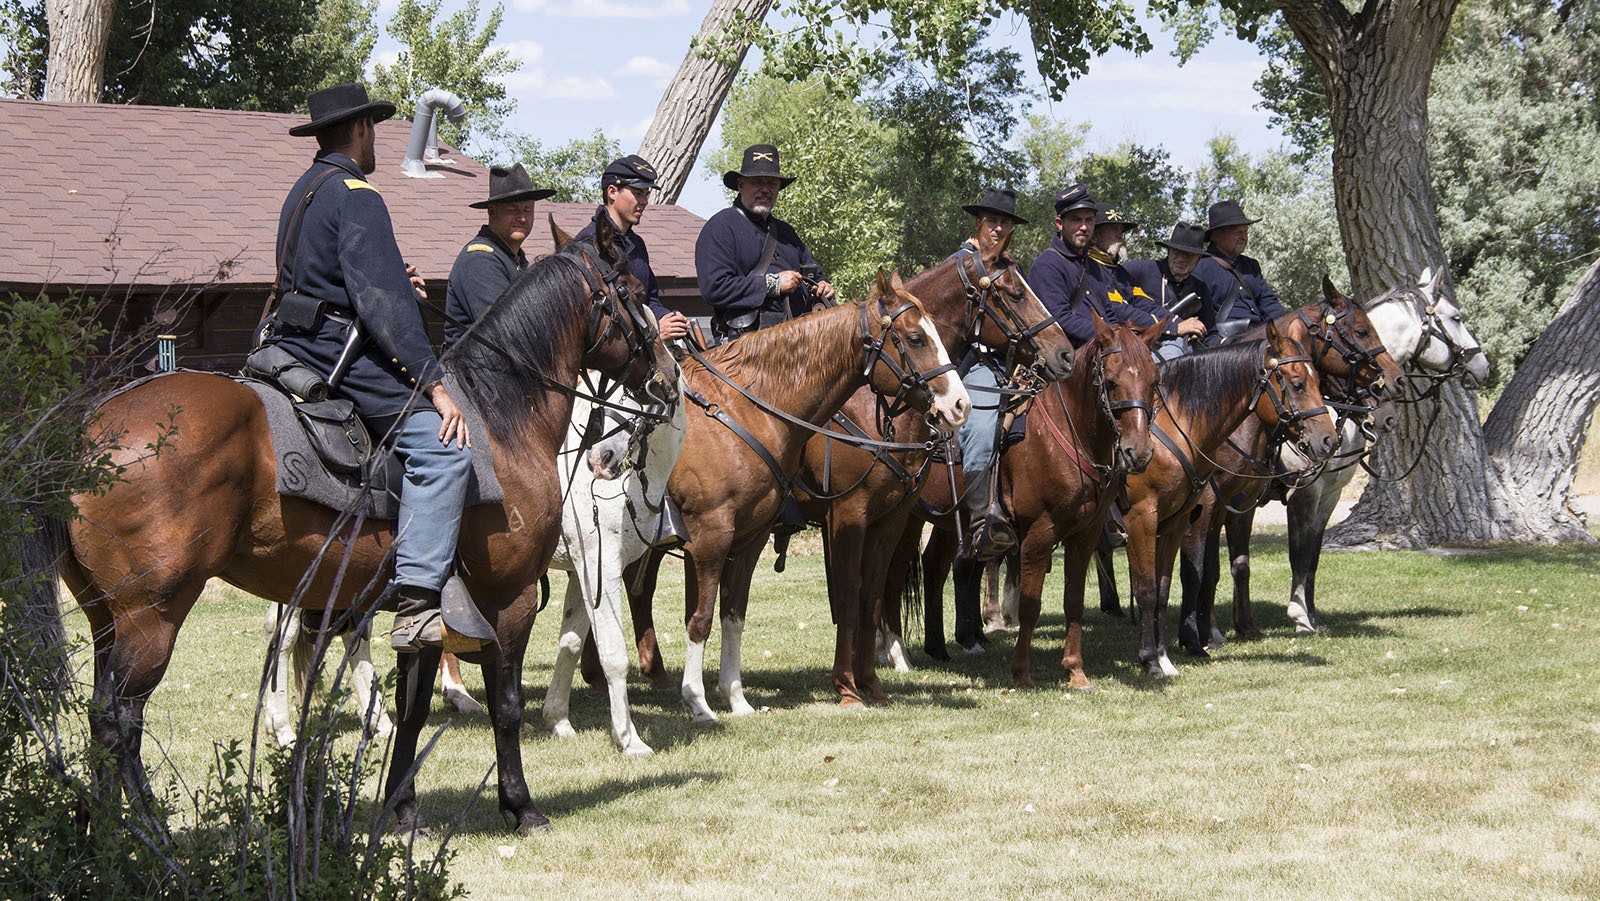 Historical reenactors play soldiers as they would've been when stationed at what is now called Fort Caspar before Wyoming statehood in this 2015 file photo.